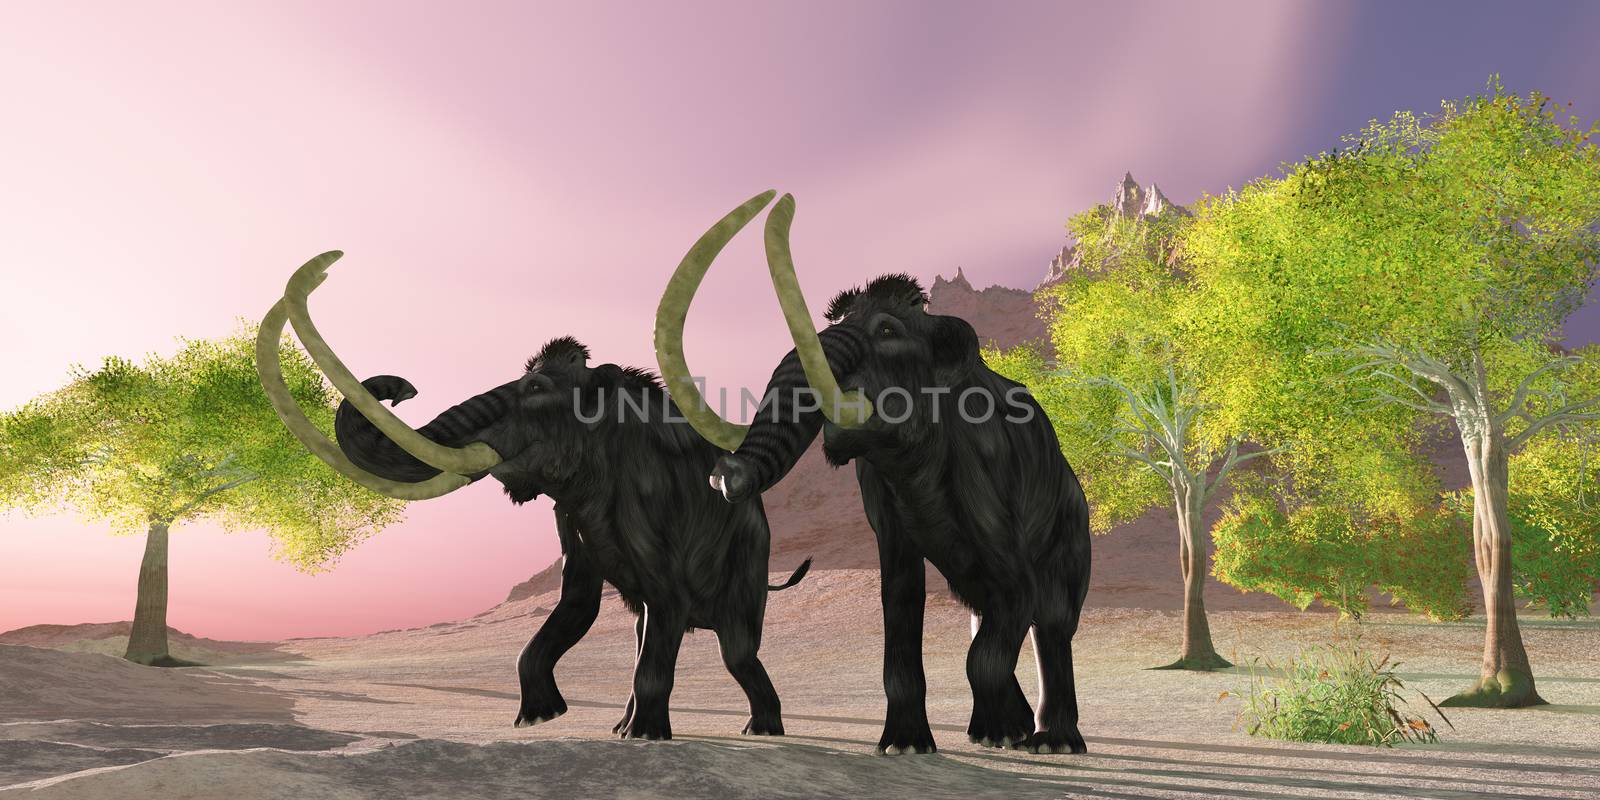 A rosy morning finds two Woolly Mammoths searching for better vegetation to eat.